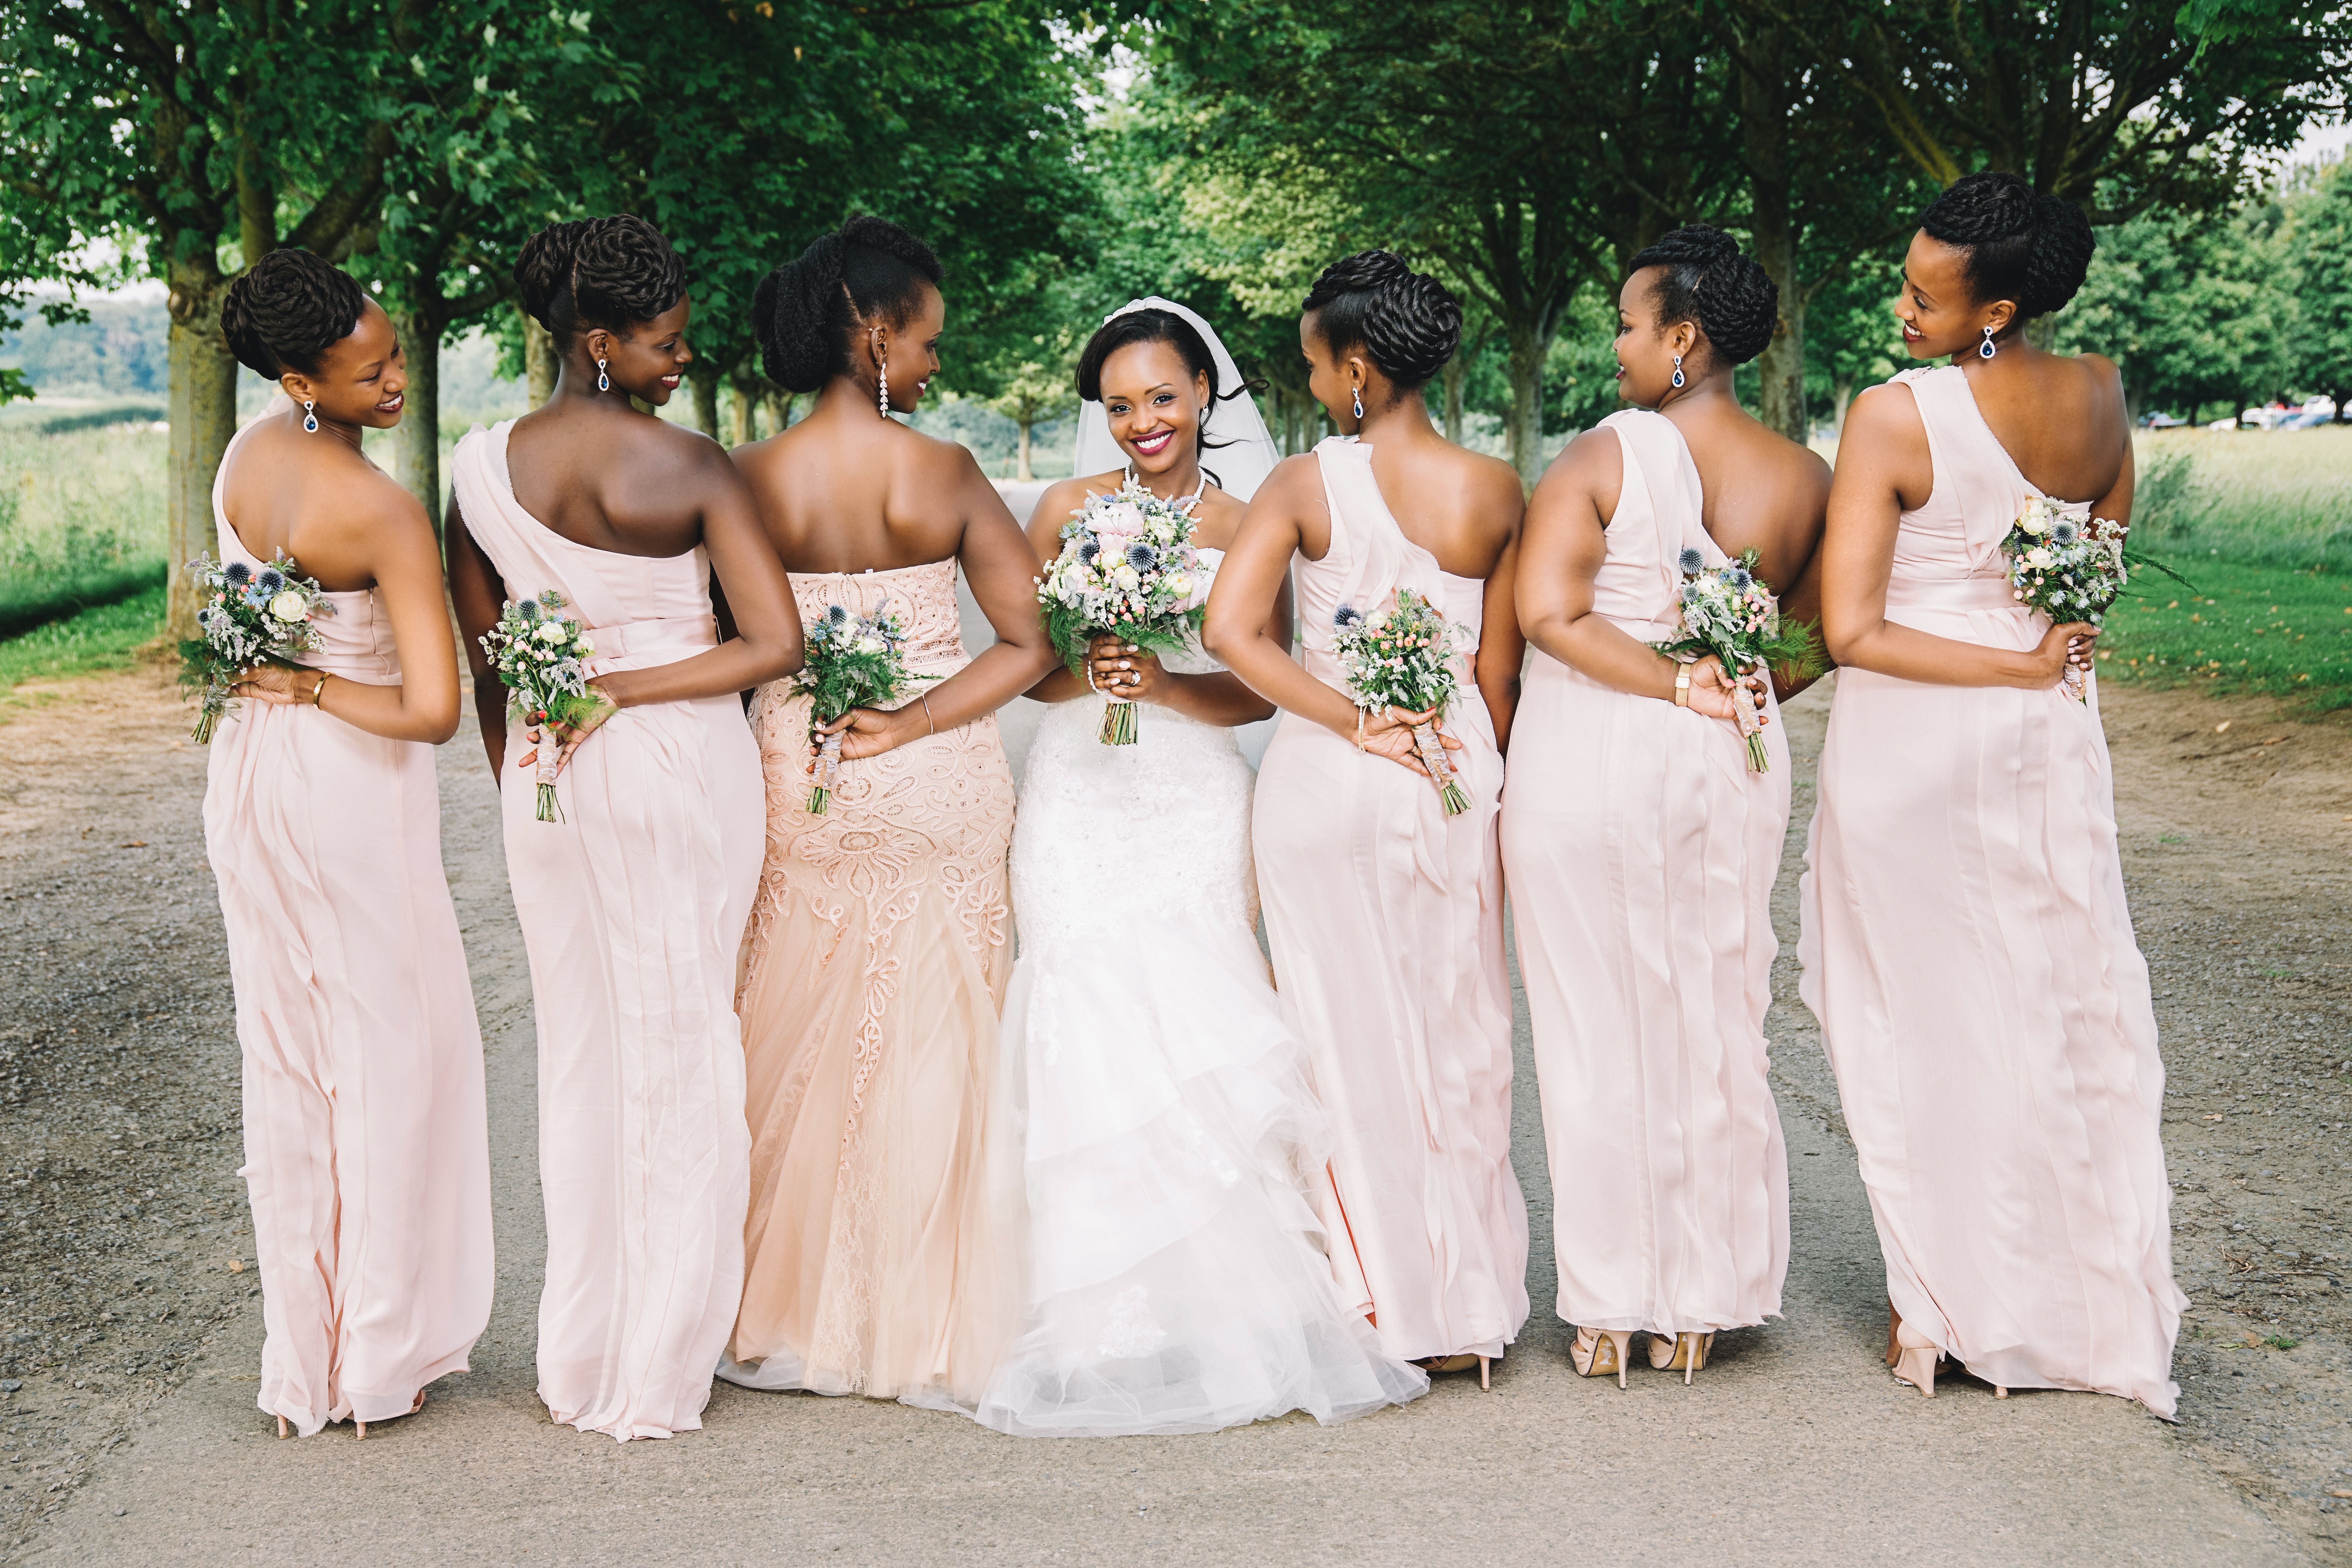 Top 5 Bridesmaid Mistakes and How to Avoid Them